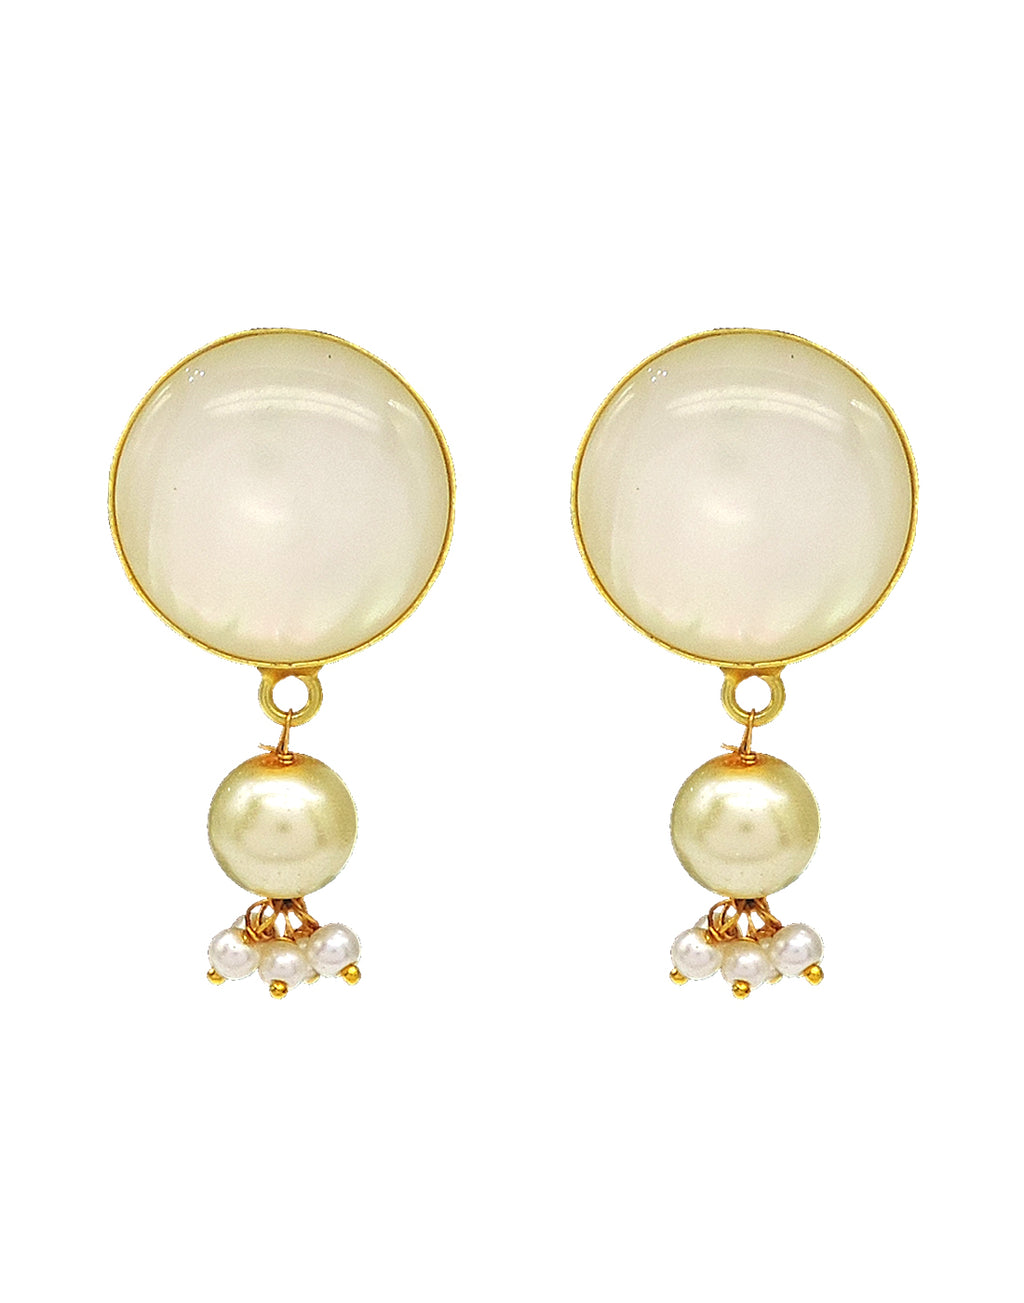 Round Shell Earrings - Statement Earrings - Gold-Plated & Hypoallergenic Jewellery - Made in India - Dubai Jewellery - Dori